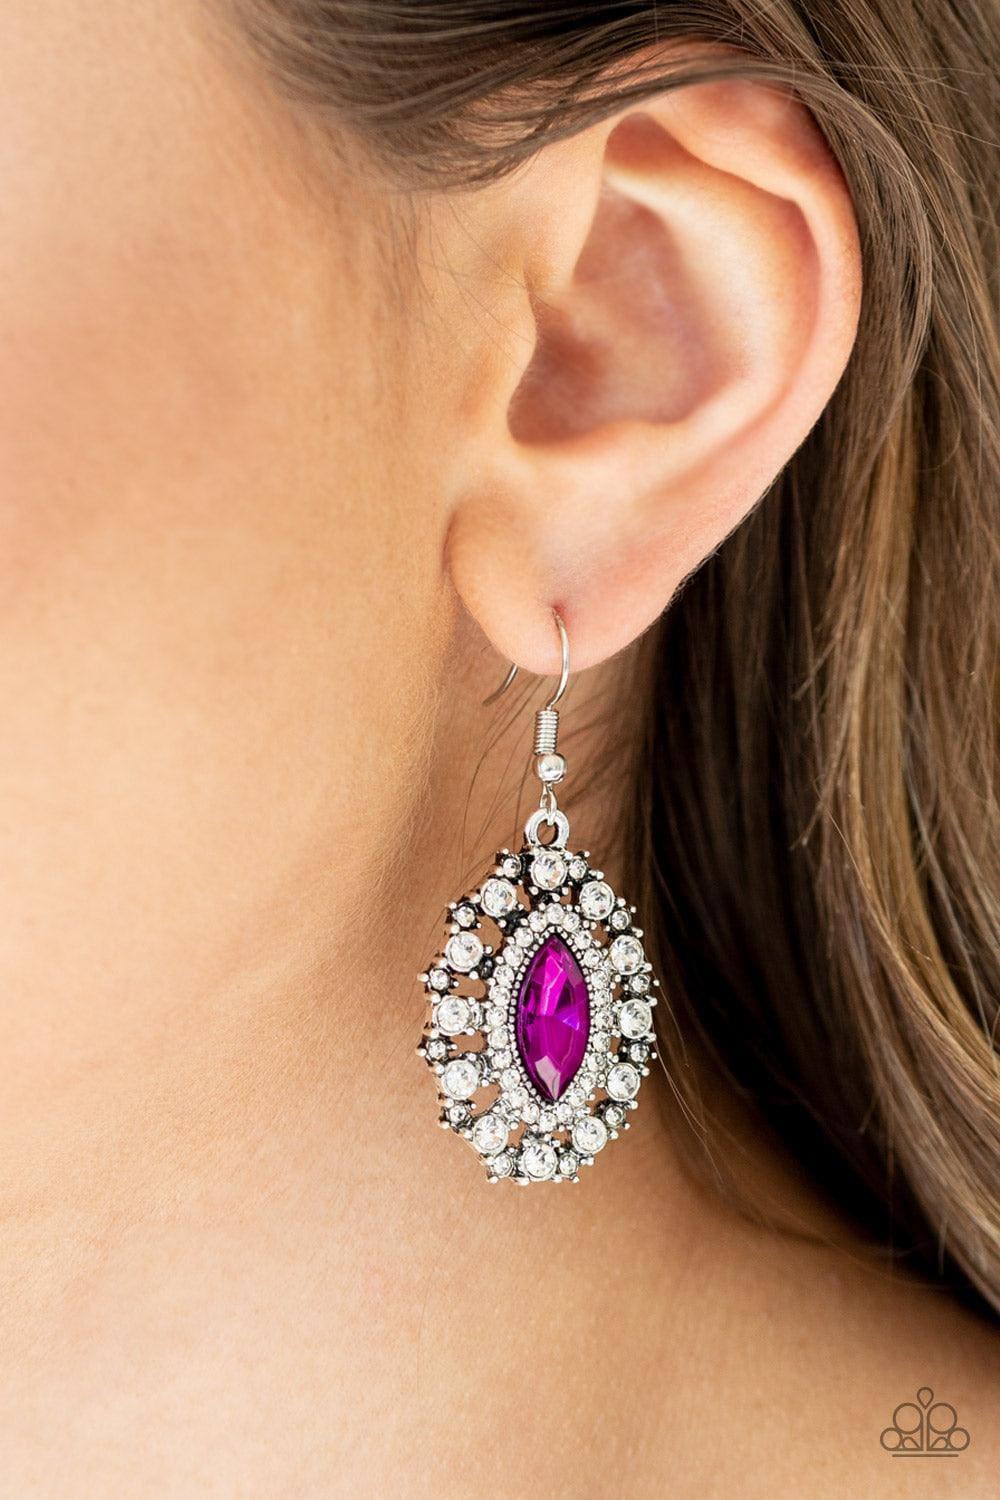 Paparazzi Accessories - Long May She Reign - Pink Earrings - Bling by JessieK